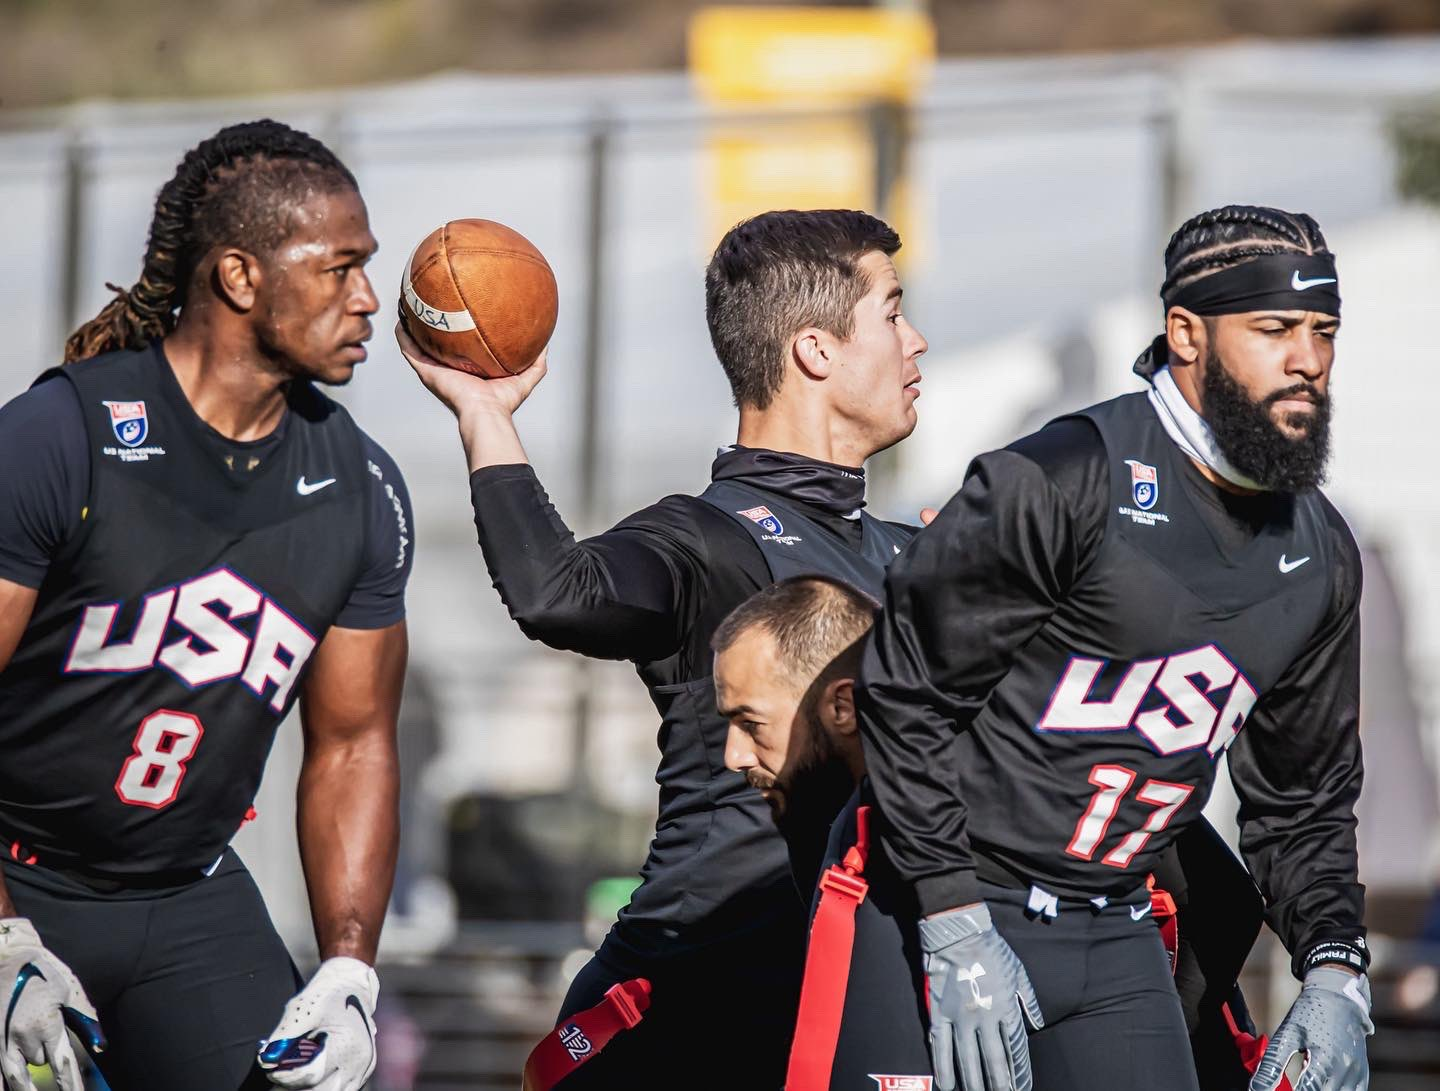 Semi-final line-up decided at World Flag Football Championships in Israel